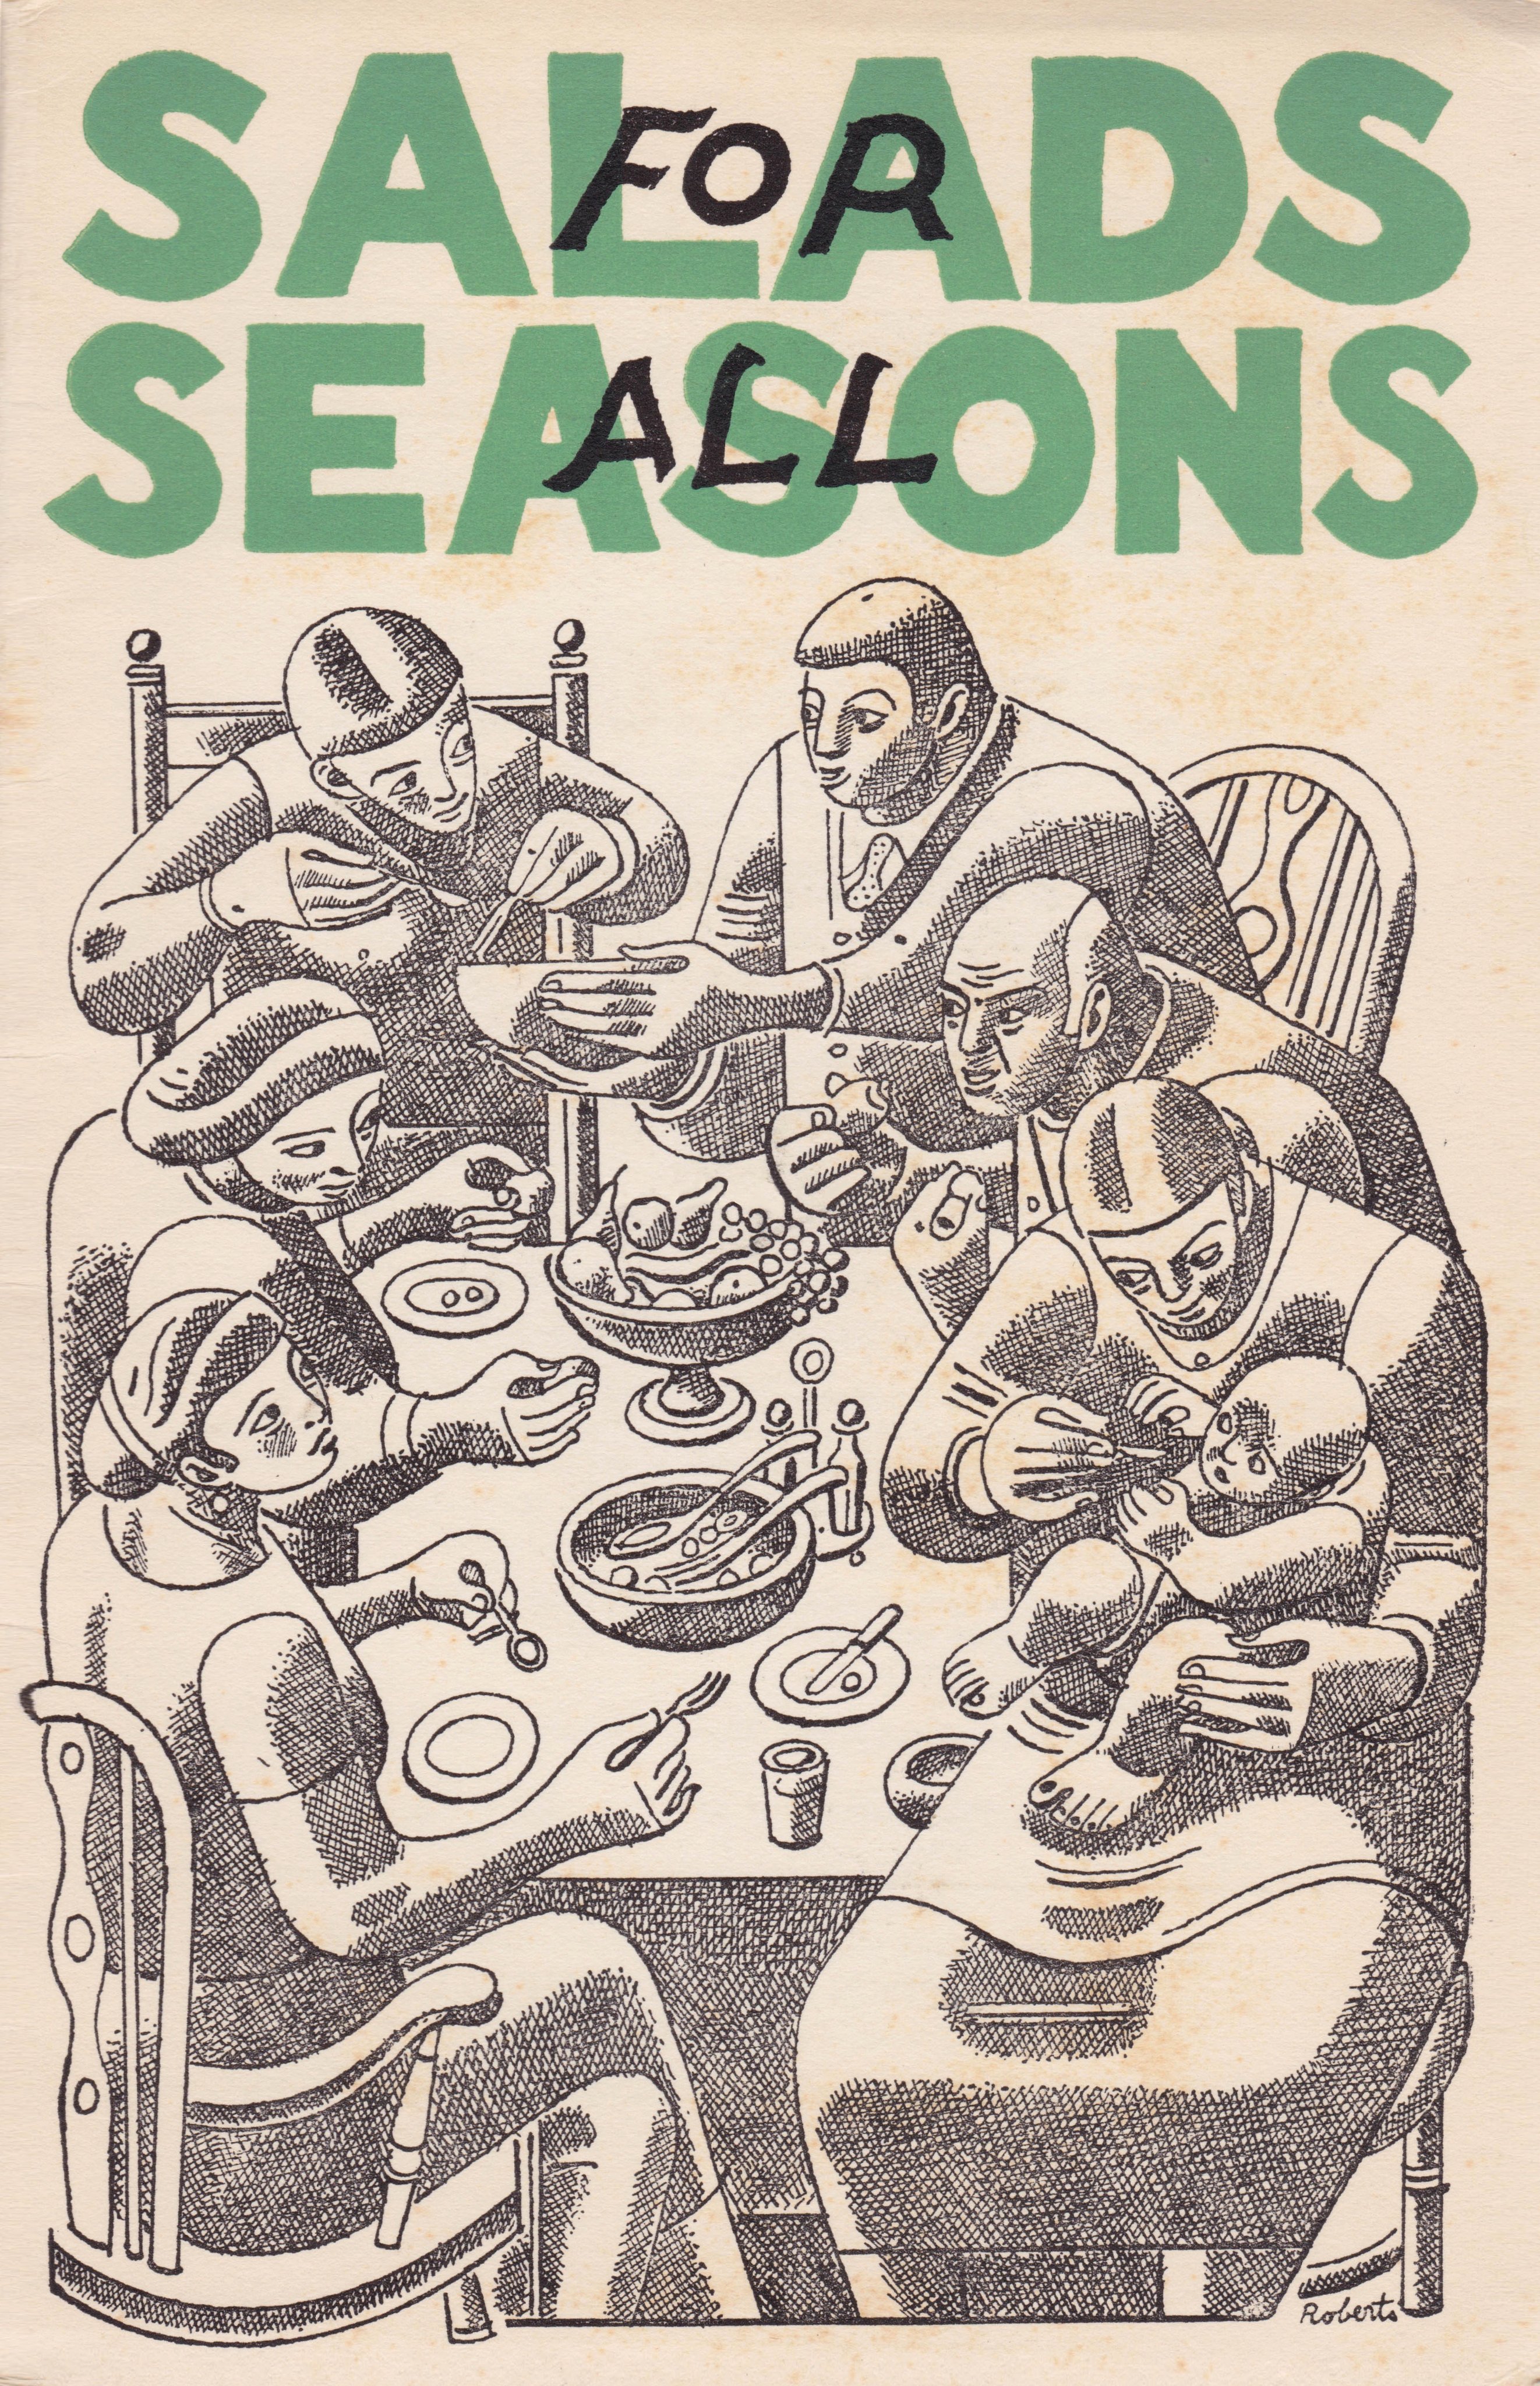 1940s cookbook covers by English cubist William Roberts